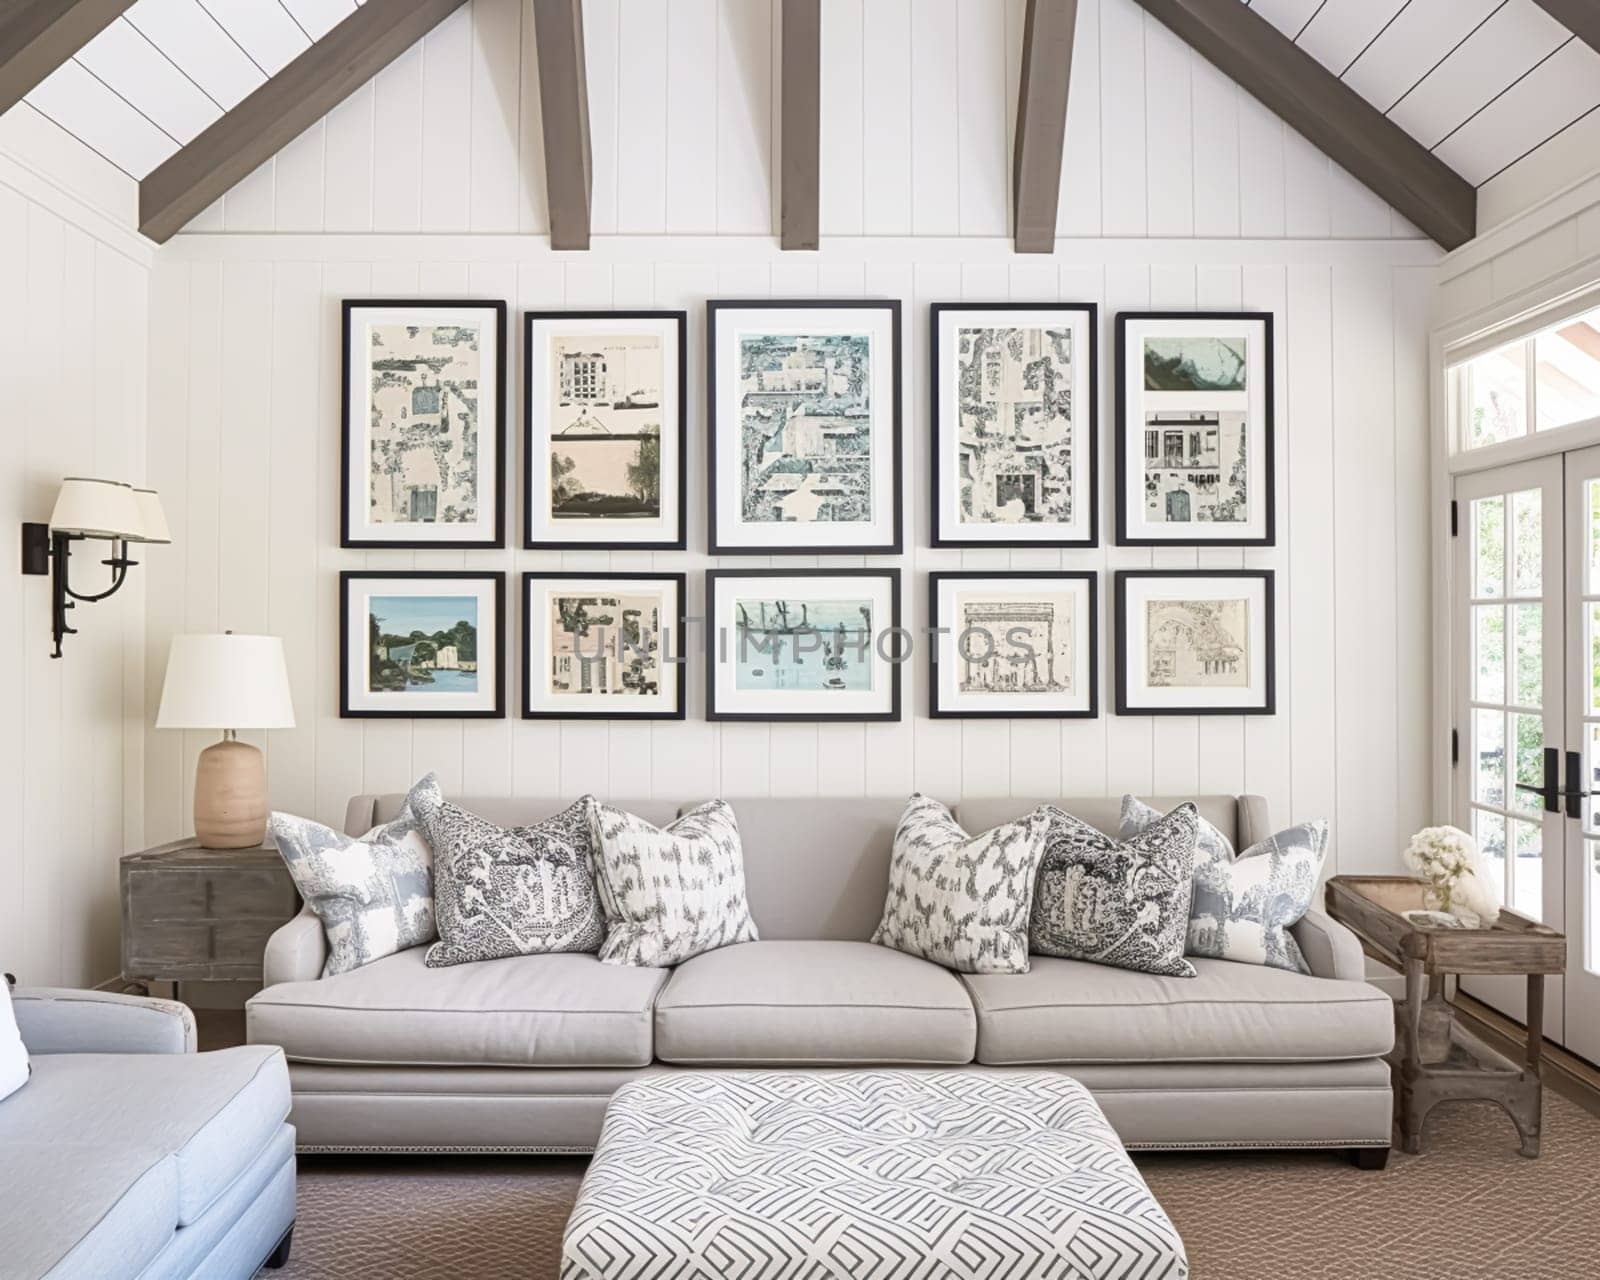 Living room gallery wall, home decor and wall art, framed art in the English country cottage interior, room for diy printable artwork mockup and print shop by Anneleven